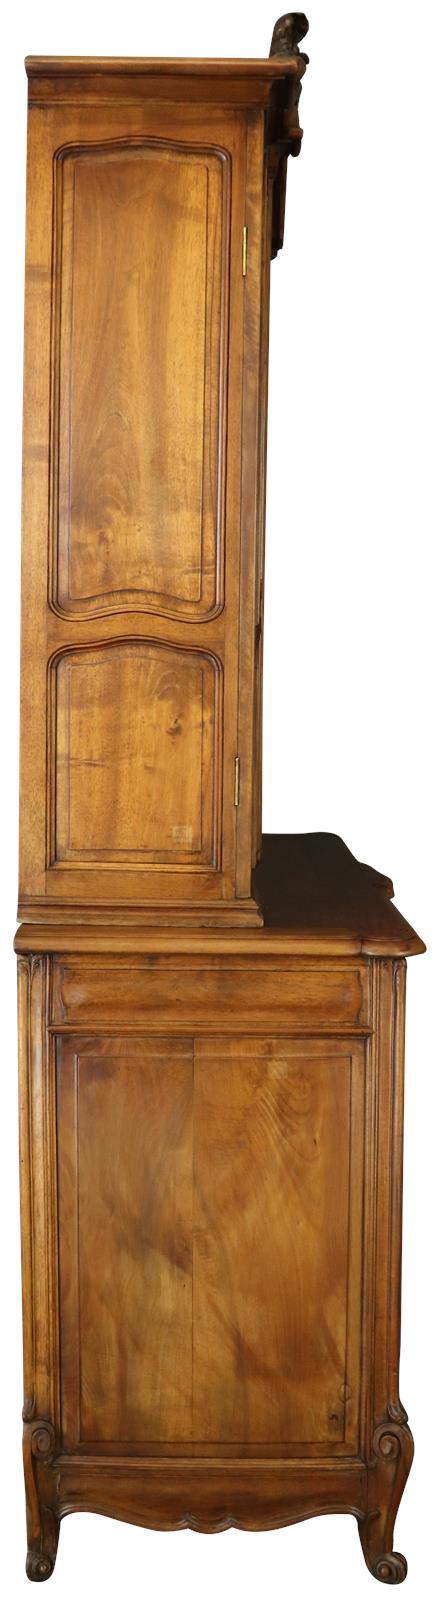 Cabinet Antique French Louis XV Rococo Walnut Wood 1900 Pretty Glass Door-Image 17